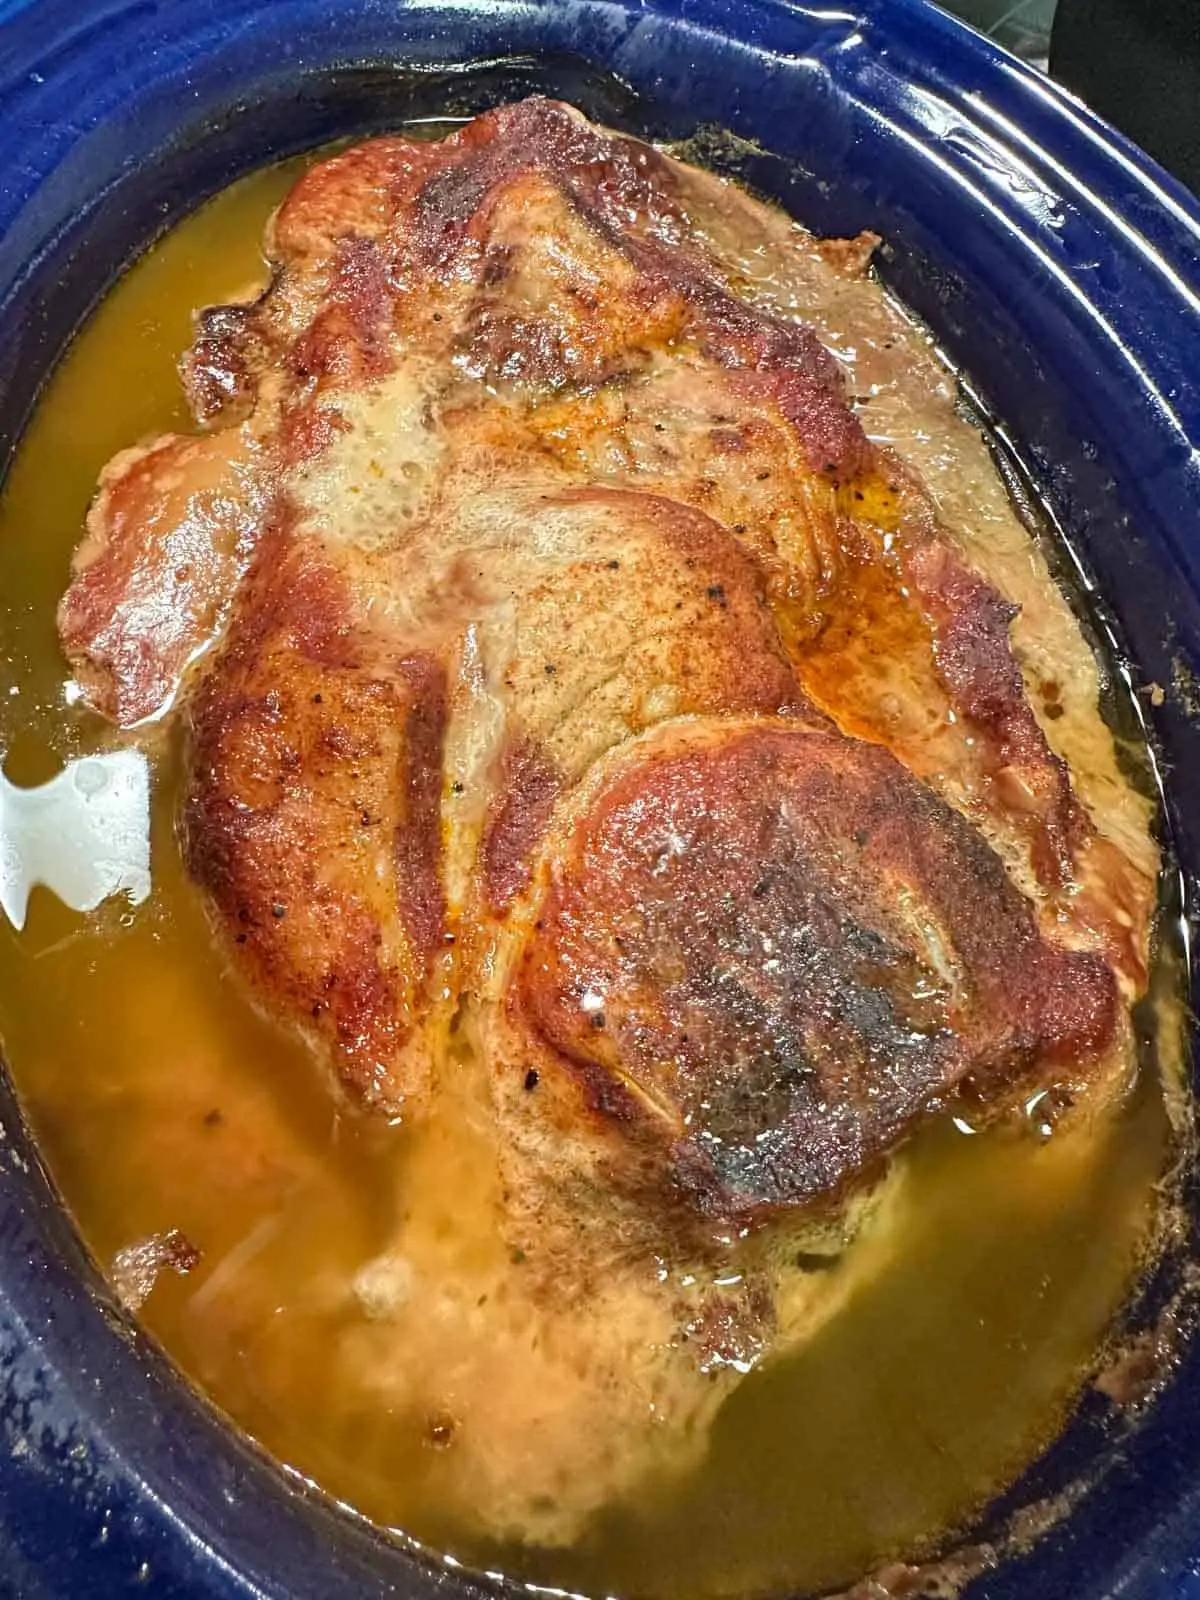 Pork which has been cooked in a blue slow cooker with its resulting broth from cooking.